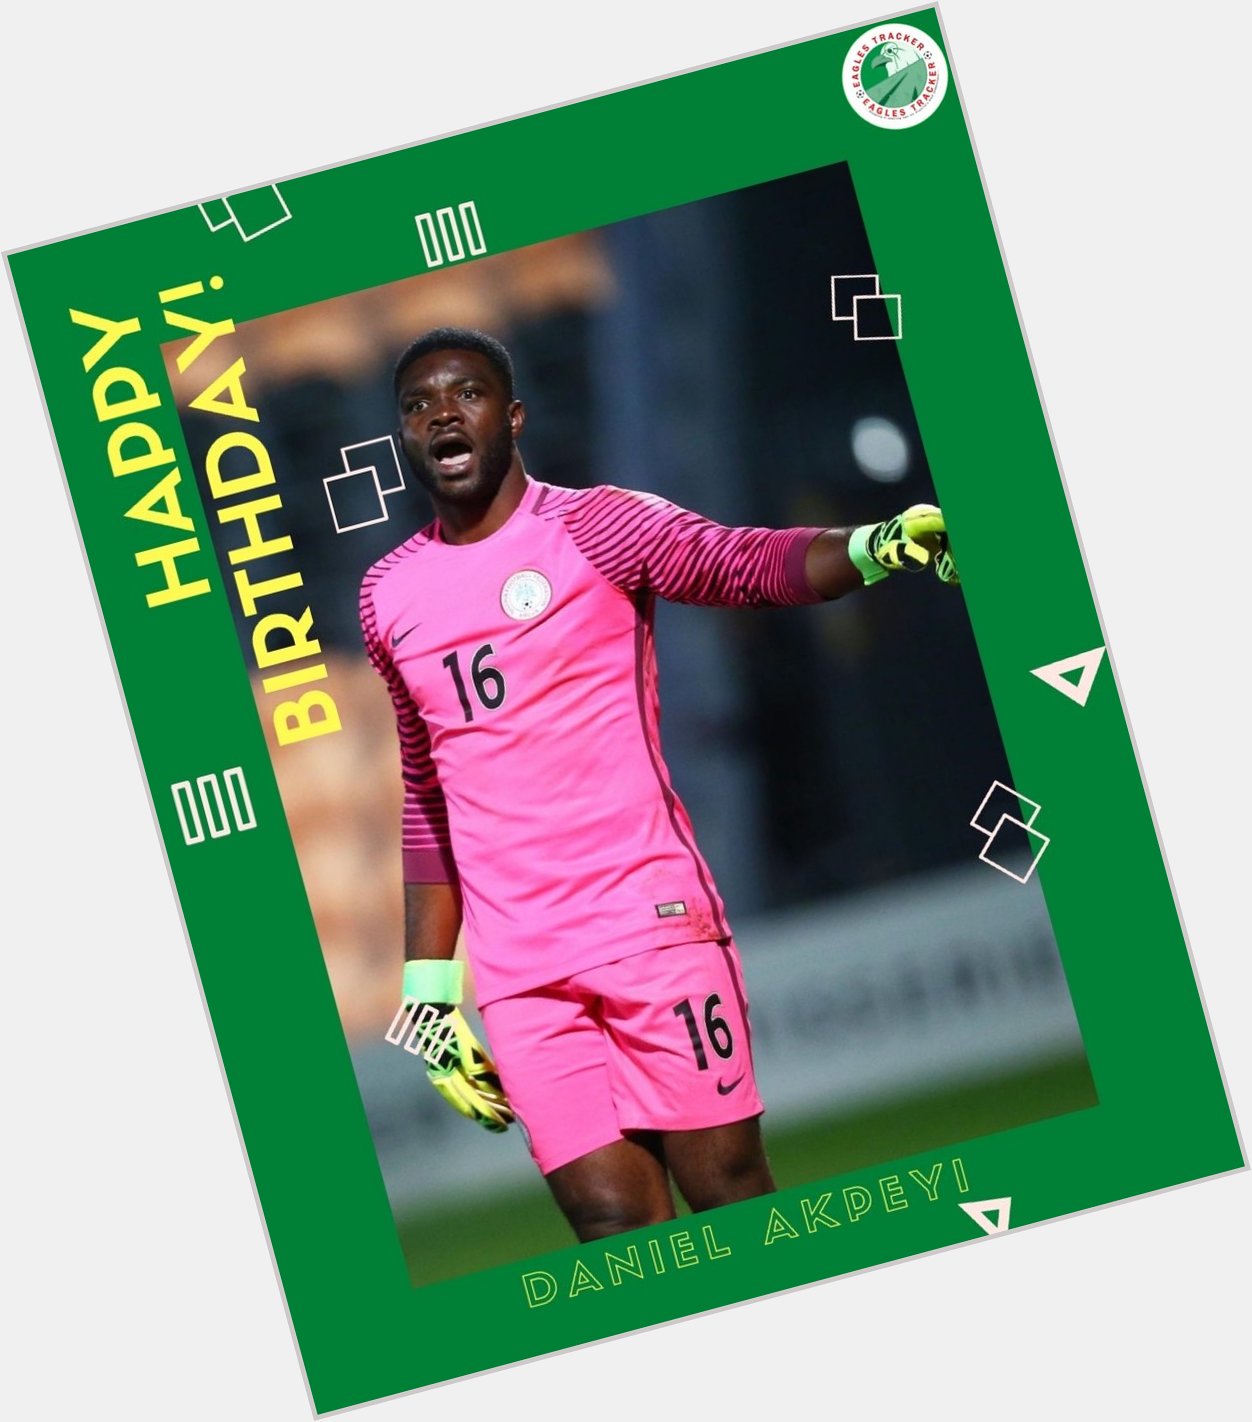 Happy Birthday to Super Eagles goalkeeper, Daniel Akpeyi
The shot-stopper turns 34 today. 